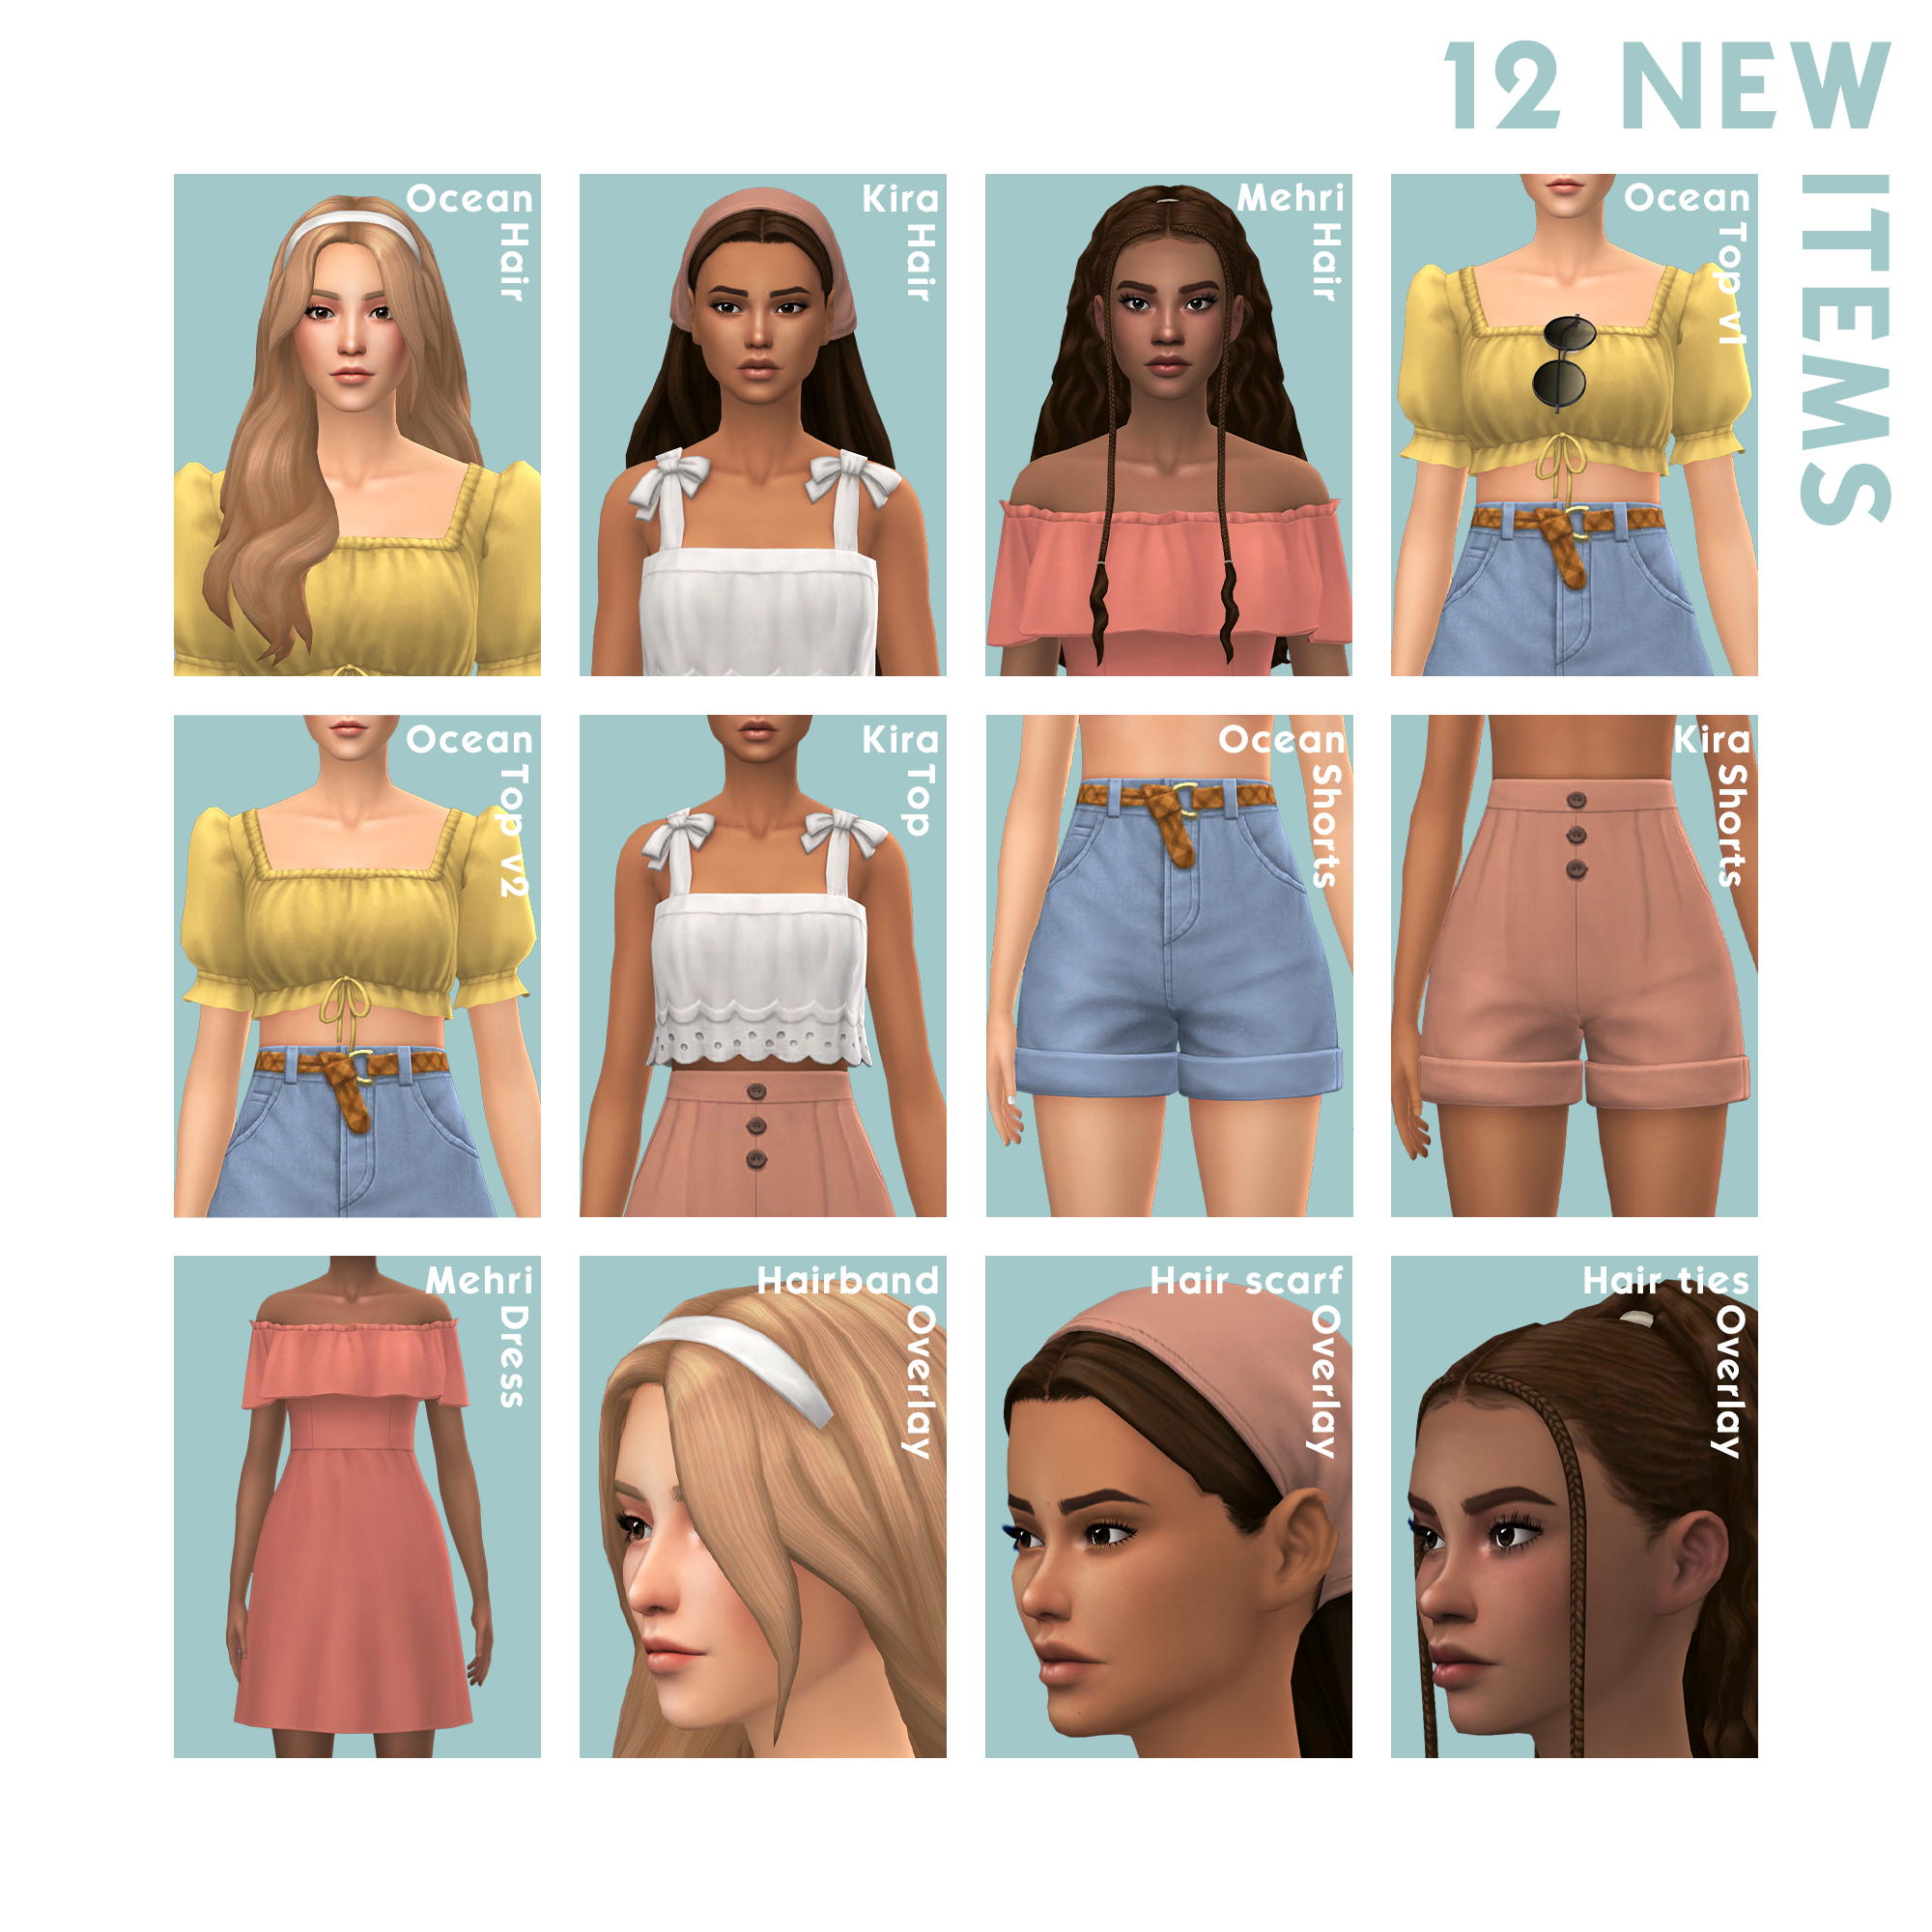 QICC - June 2022 Collection - The Sims 4 Create a Sim - CurseForge